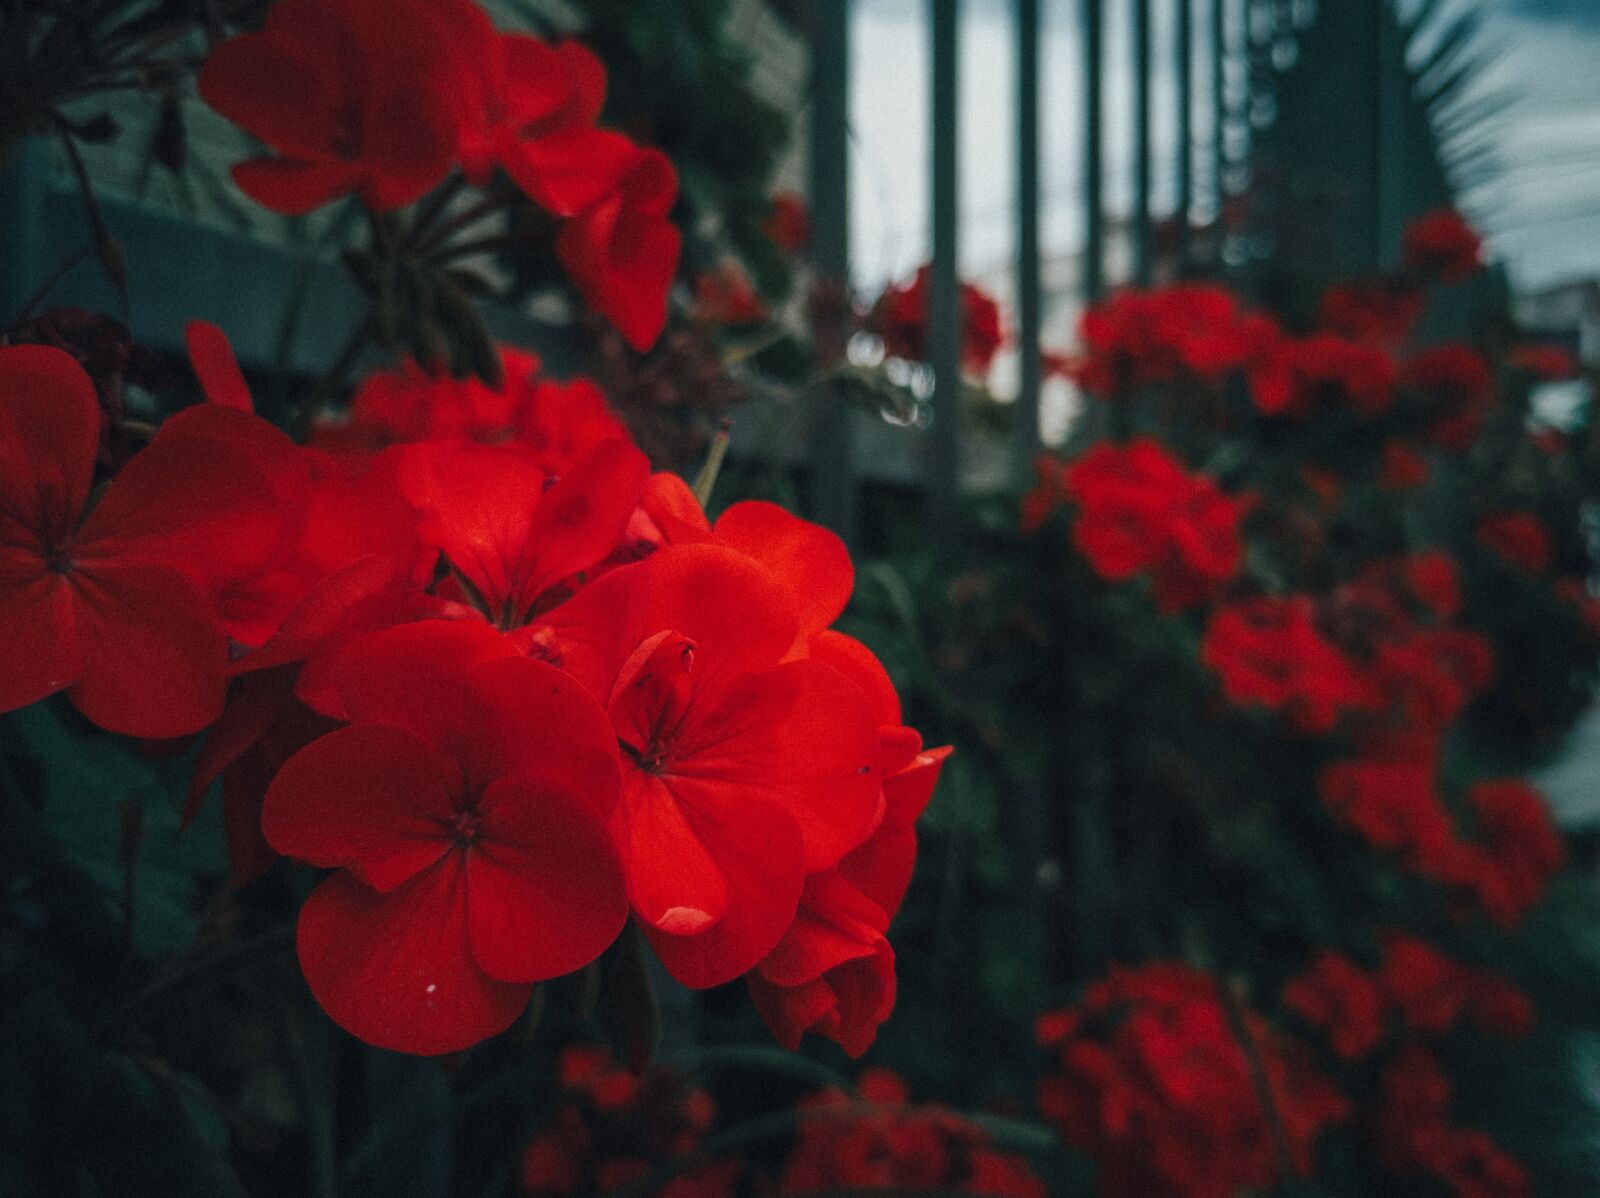 HUAWEI P20 sample photo. Geranium, red, passion photography